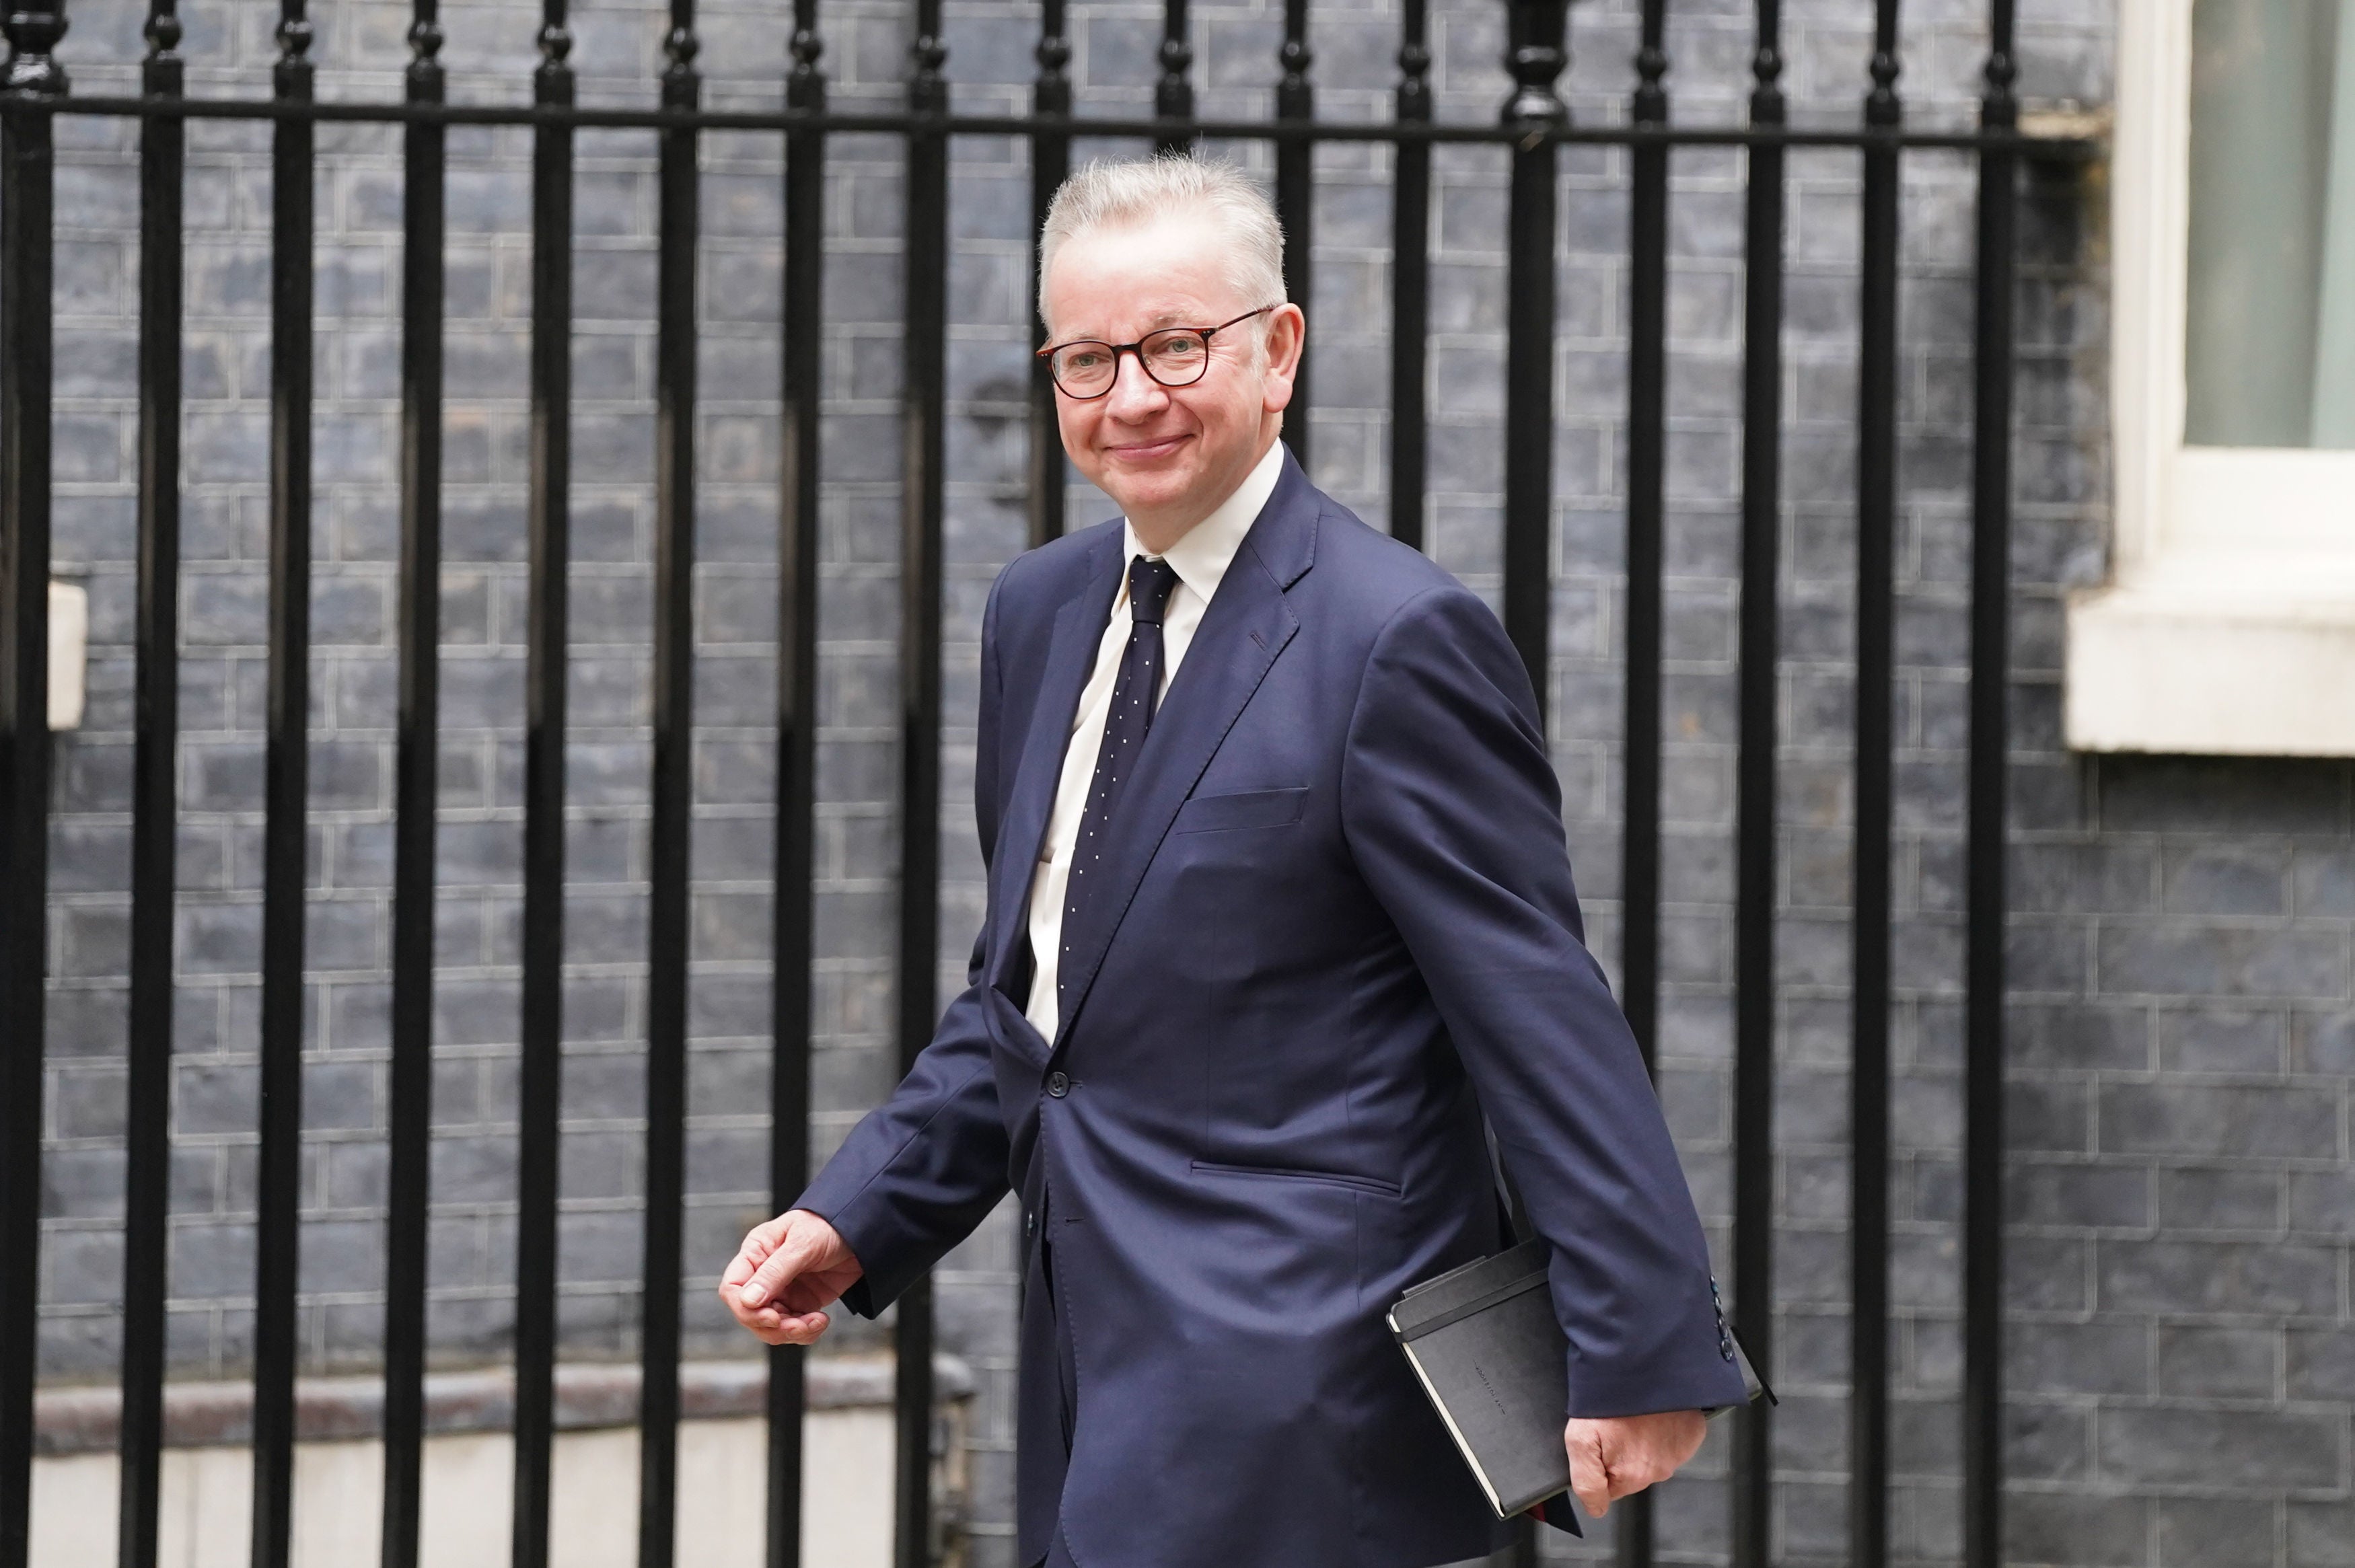 ‘Michael Gove, of the famously wide-ranging education reforms’